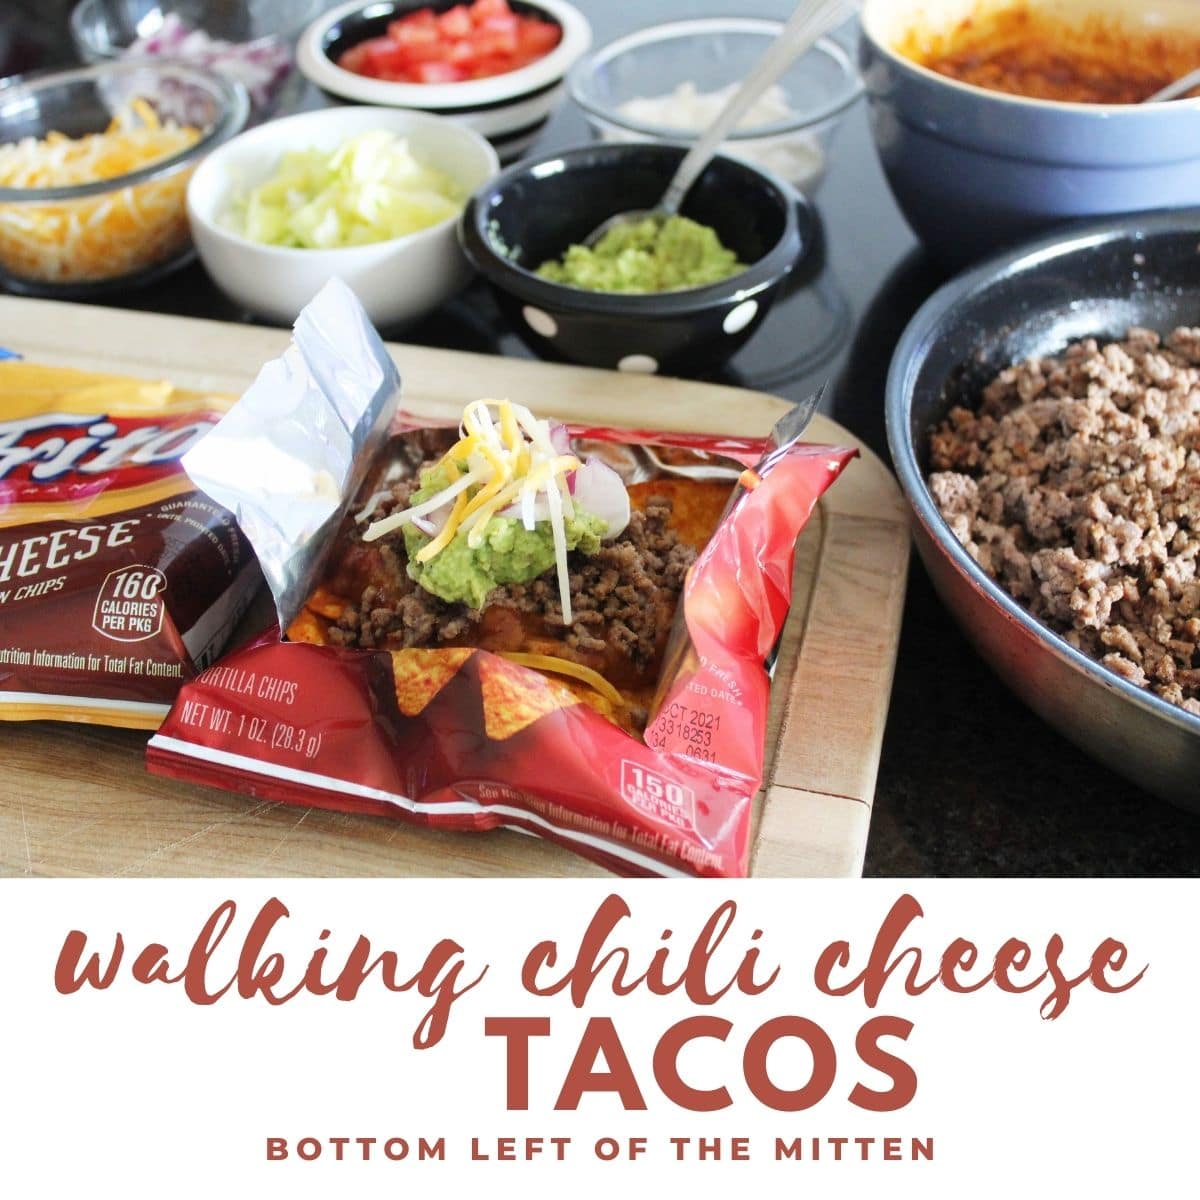 walking chili cheese tacos with descriptive text overlay.